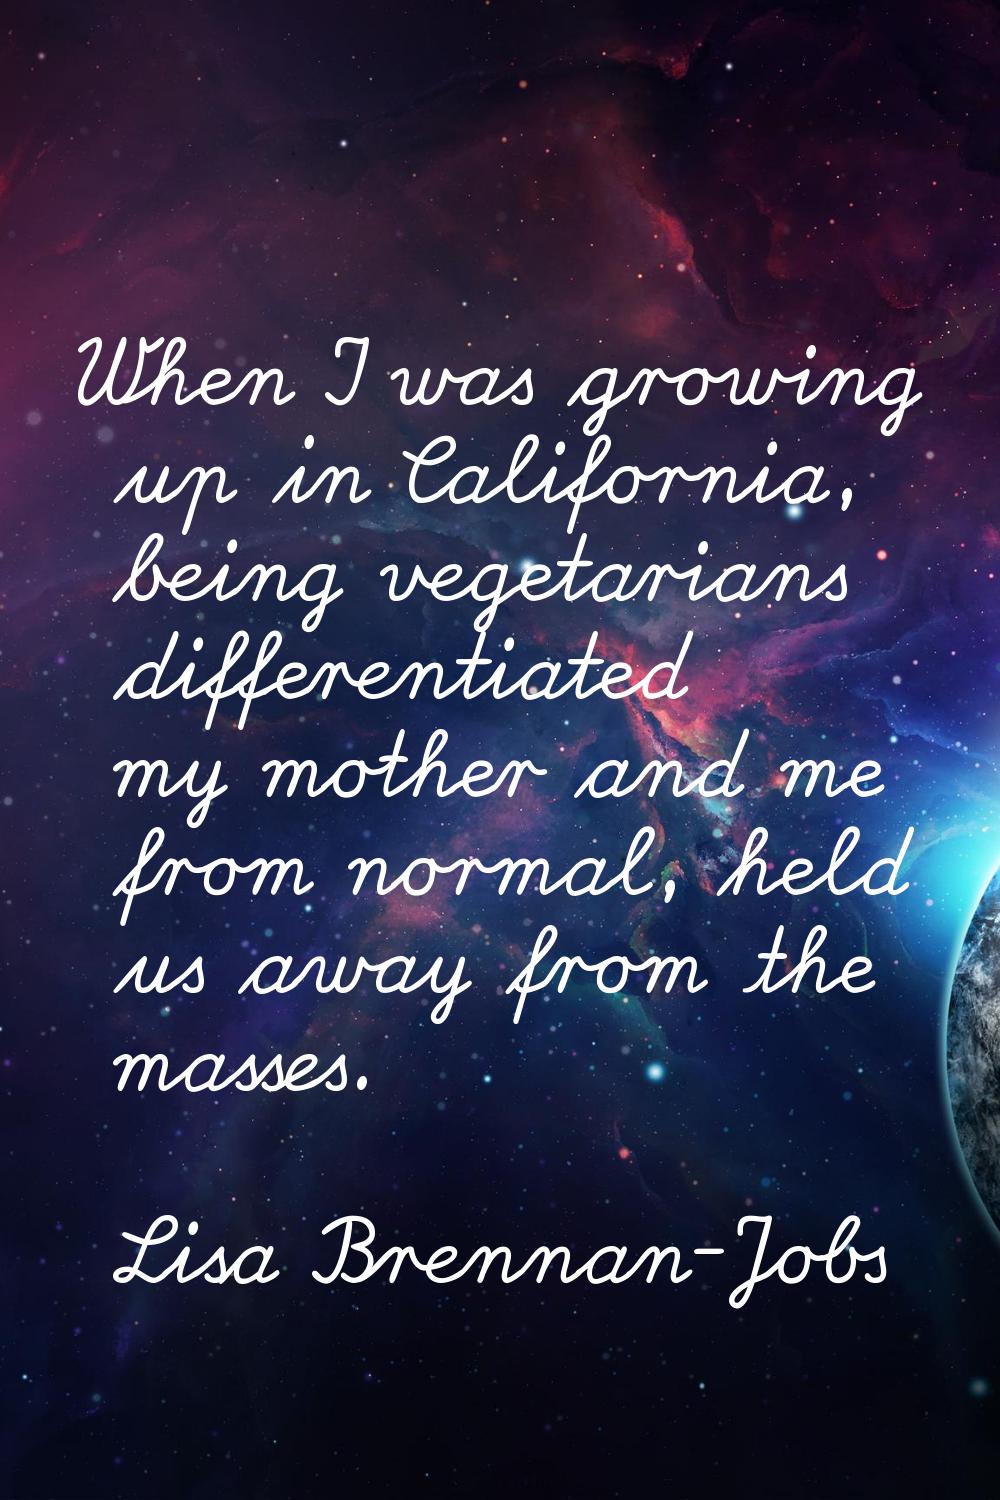 When I was growing up in California, being vegetarians differentiated my mother and me from normal,